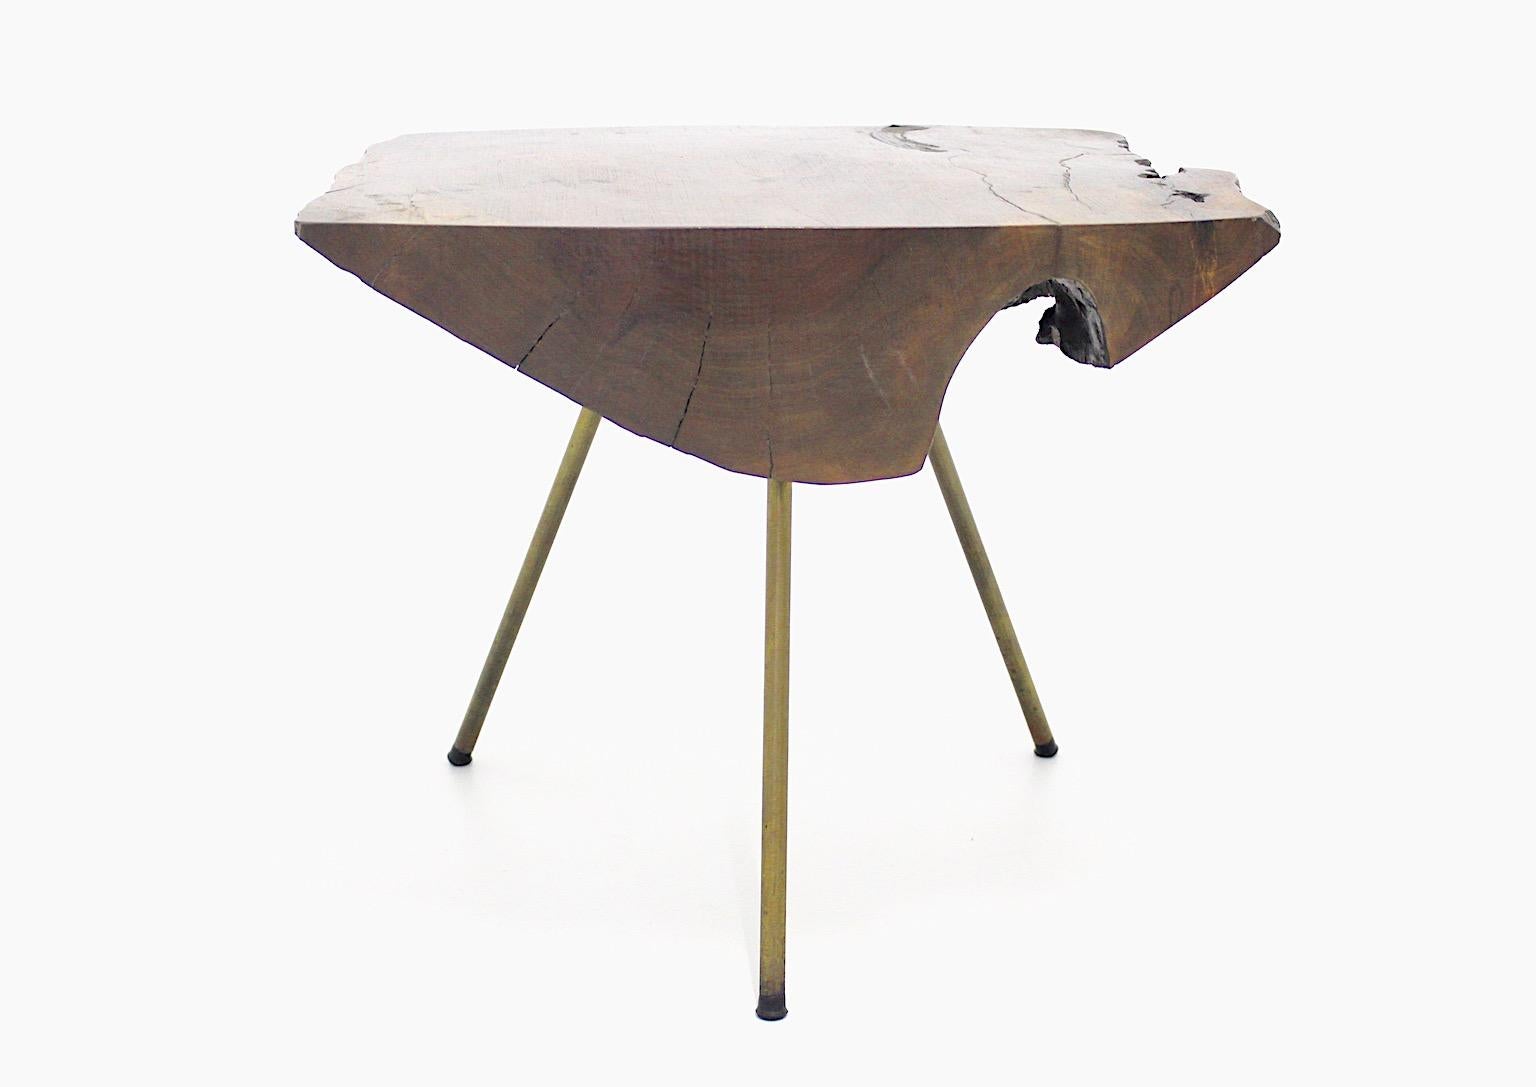 Organic Modernist vintage authentic organic coffee table or sofa table  1950s Austria.
A beautiful iconic coffee table or sofa table in wonderful small dimension, also perfect for a side table very similar to iconic Carl Auböck tree trunk